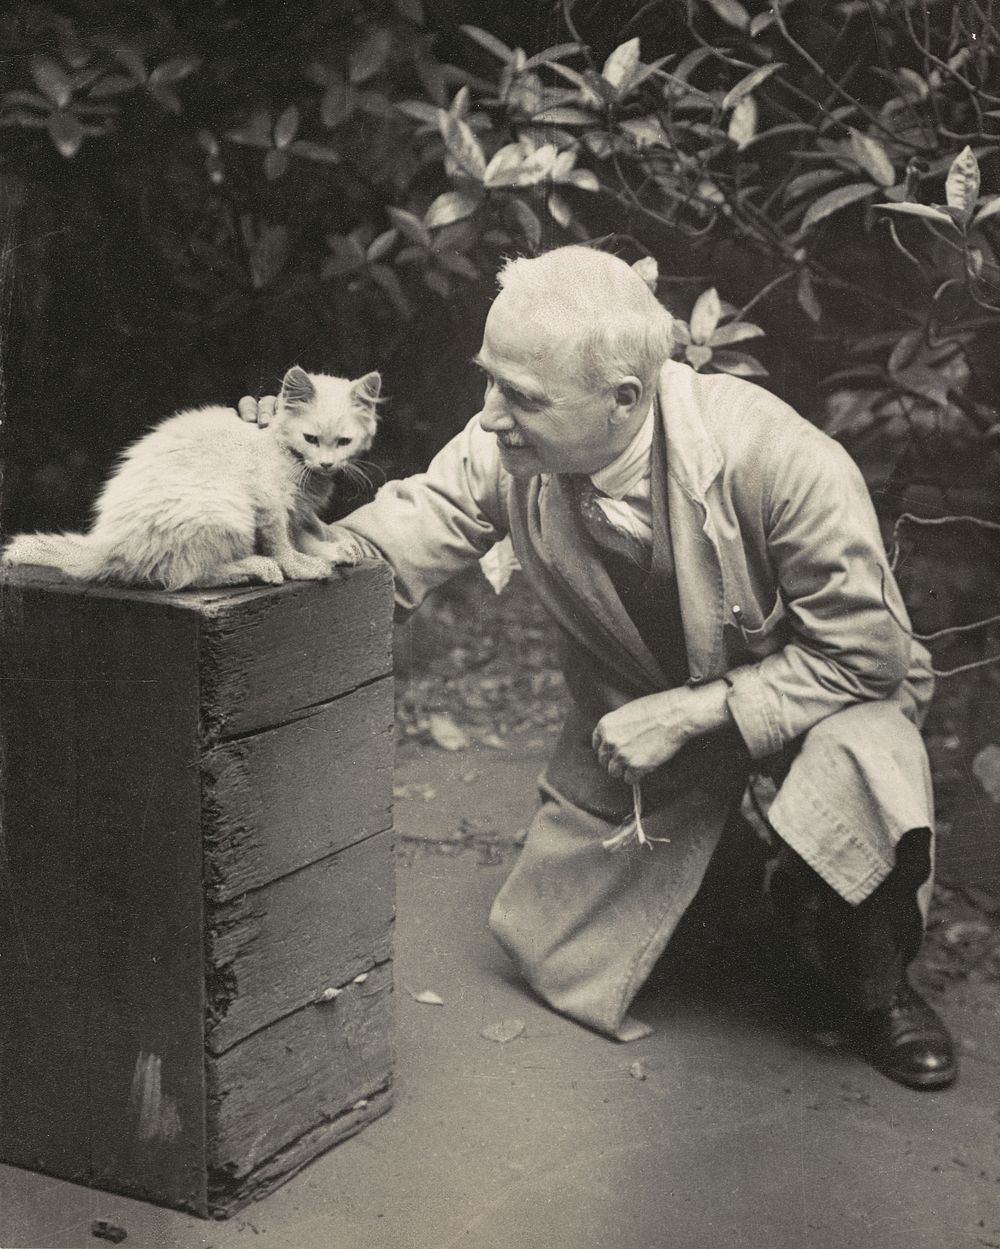 Man with a kitten (circa 1935-1939) by Marion Queenie Kirker.